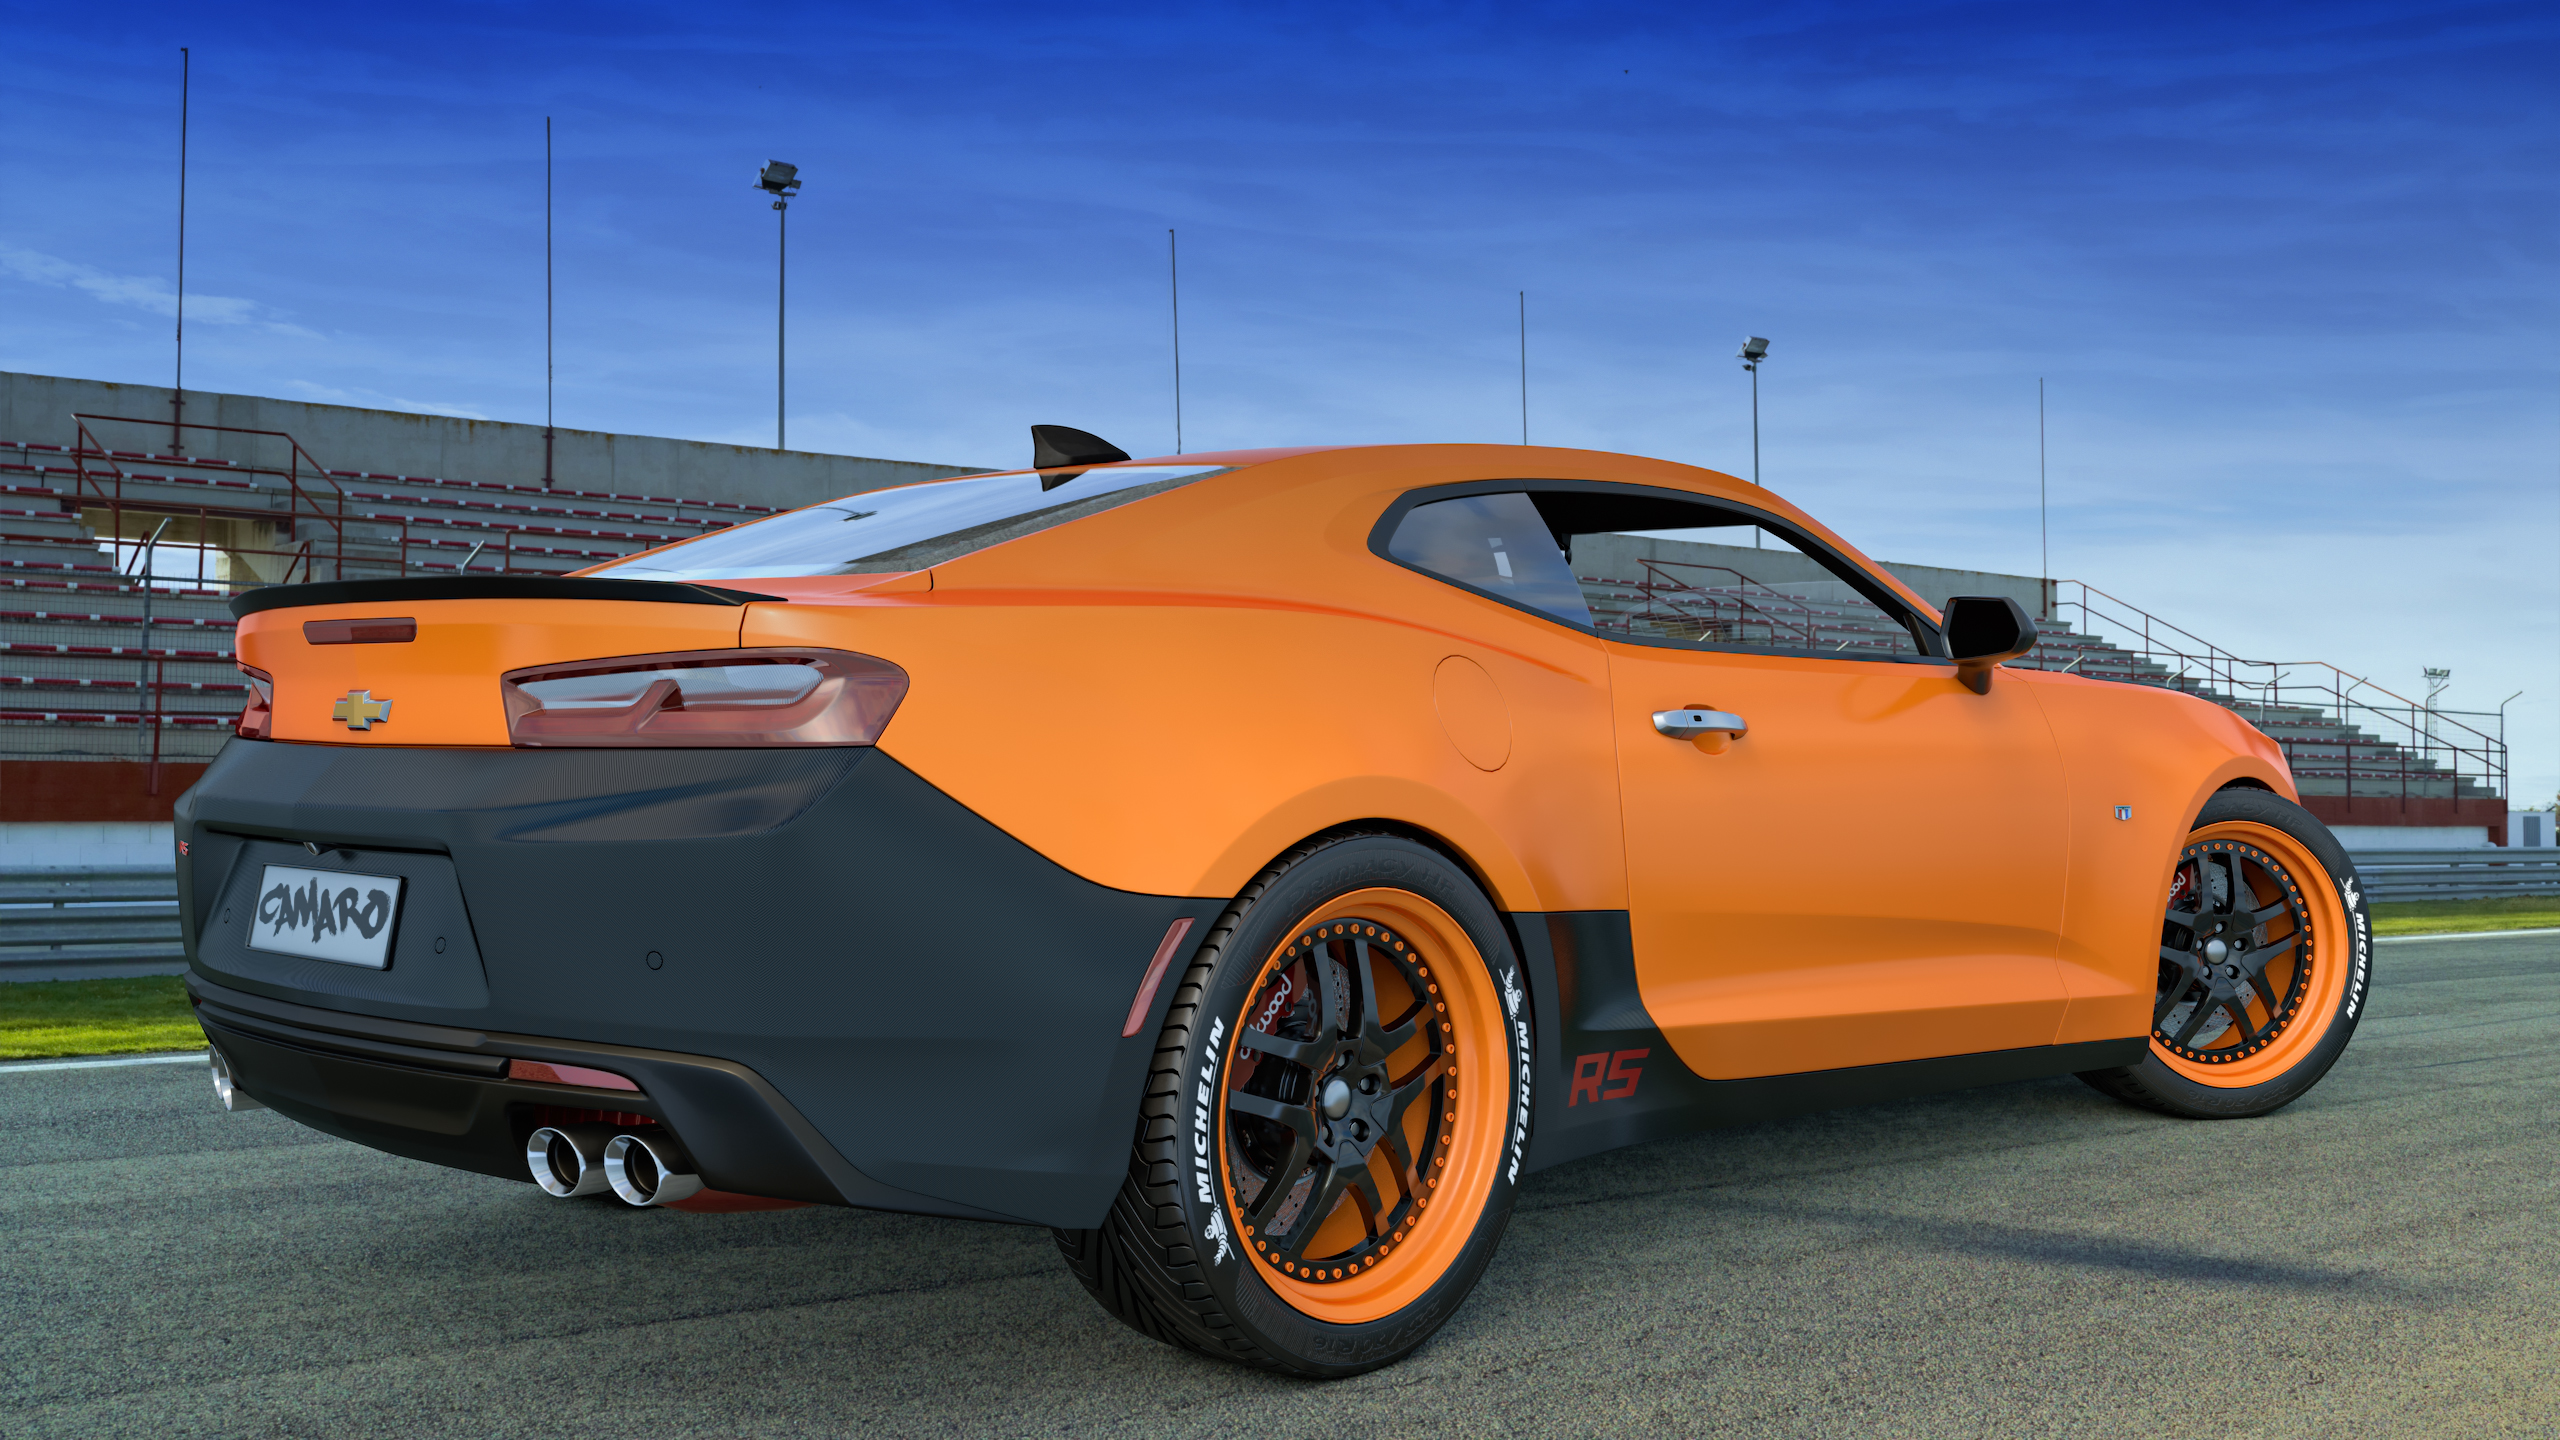 2016-chevrolet-camaro-rs-by-samcurry-on-deviantart